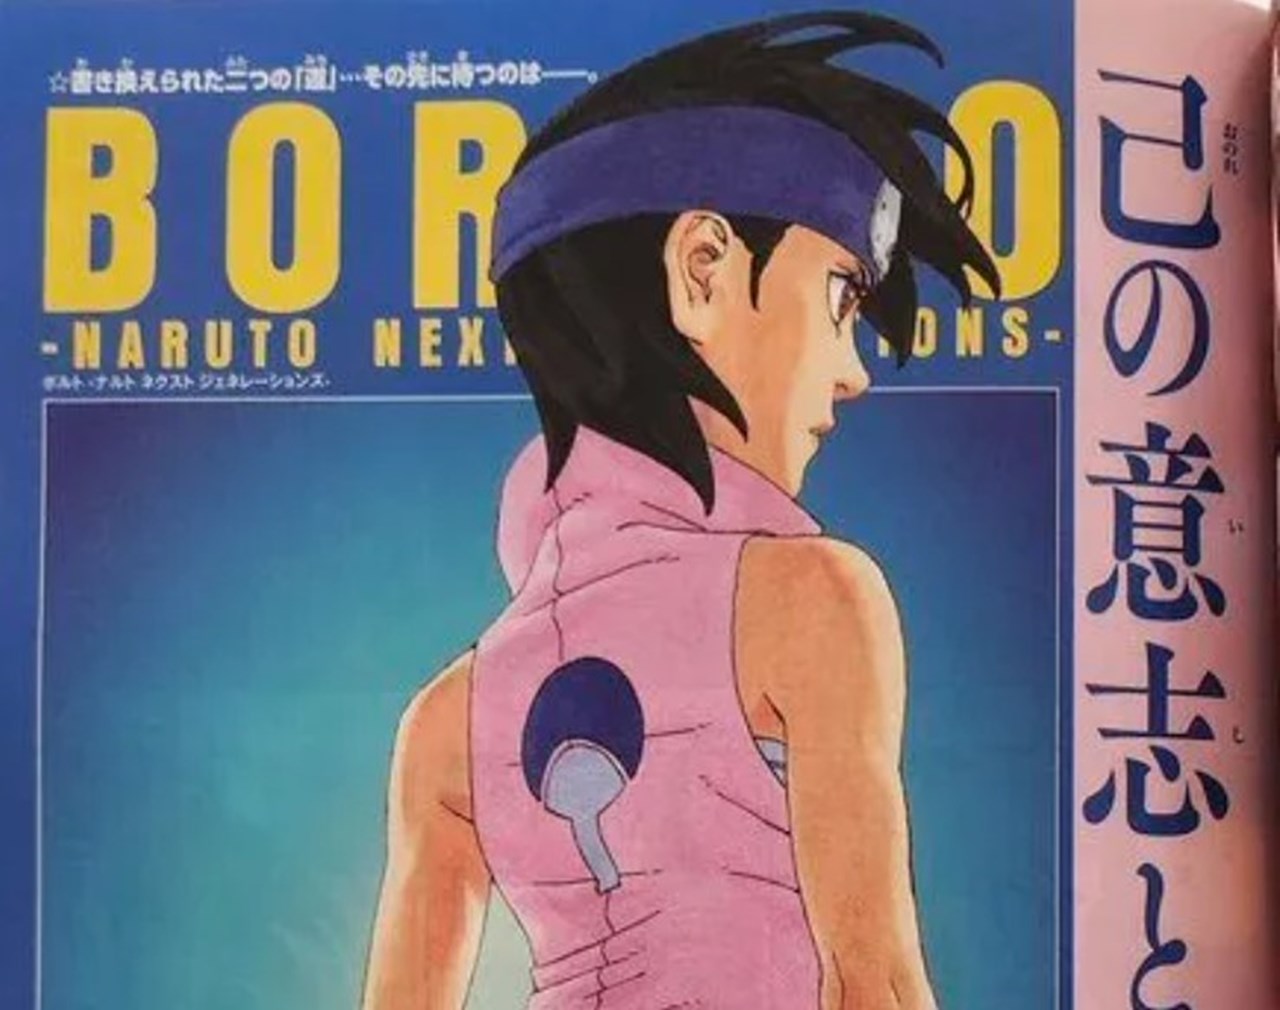 Boruto chapter 78 spoilers leak online, release date and time revealed